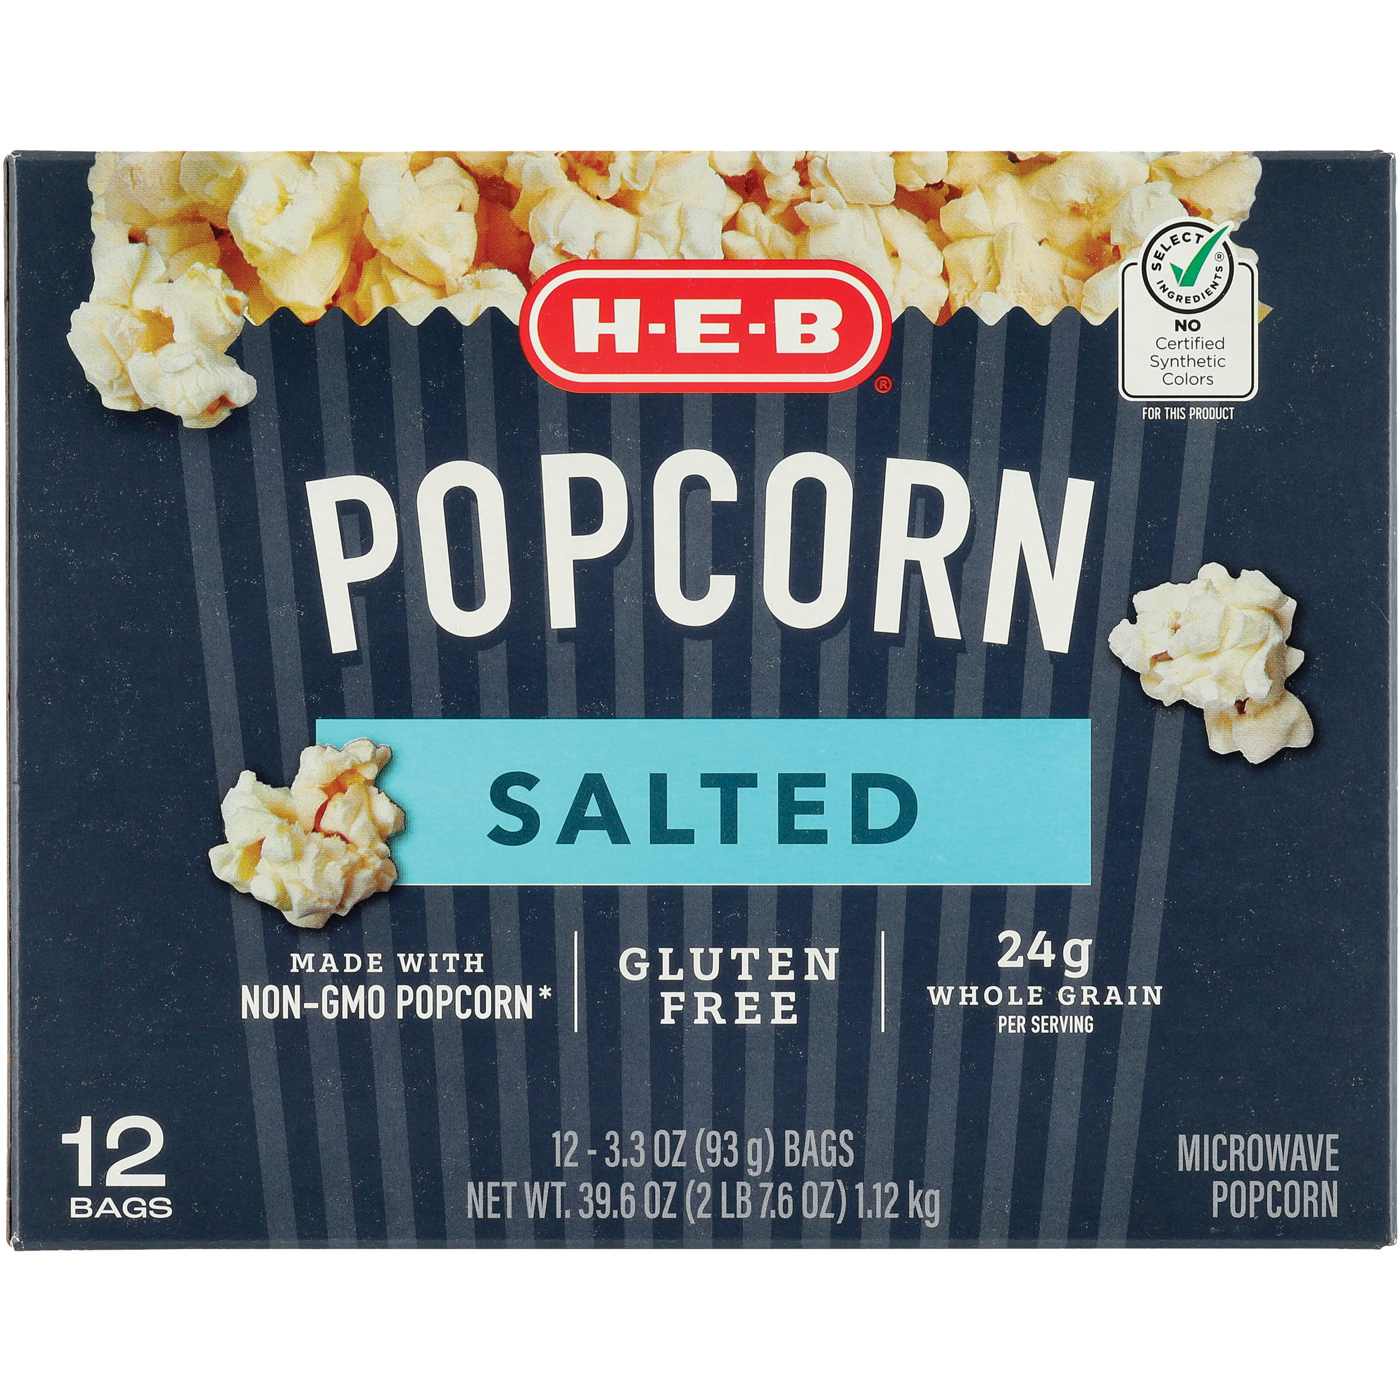 H-E-B Microwave Popcorn - Salted; image 1 of 2